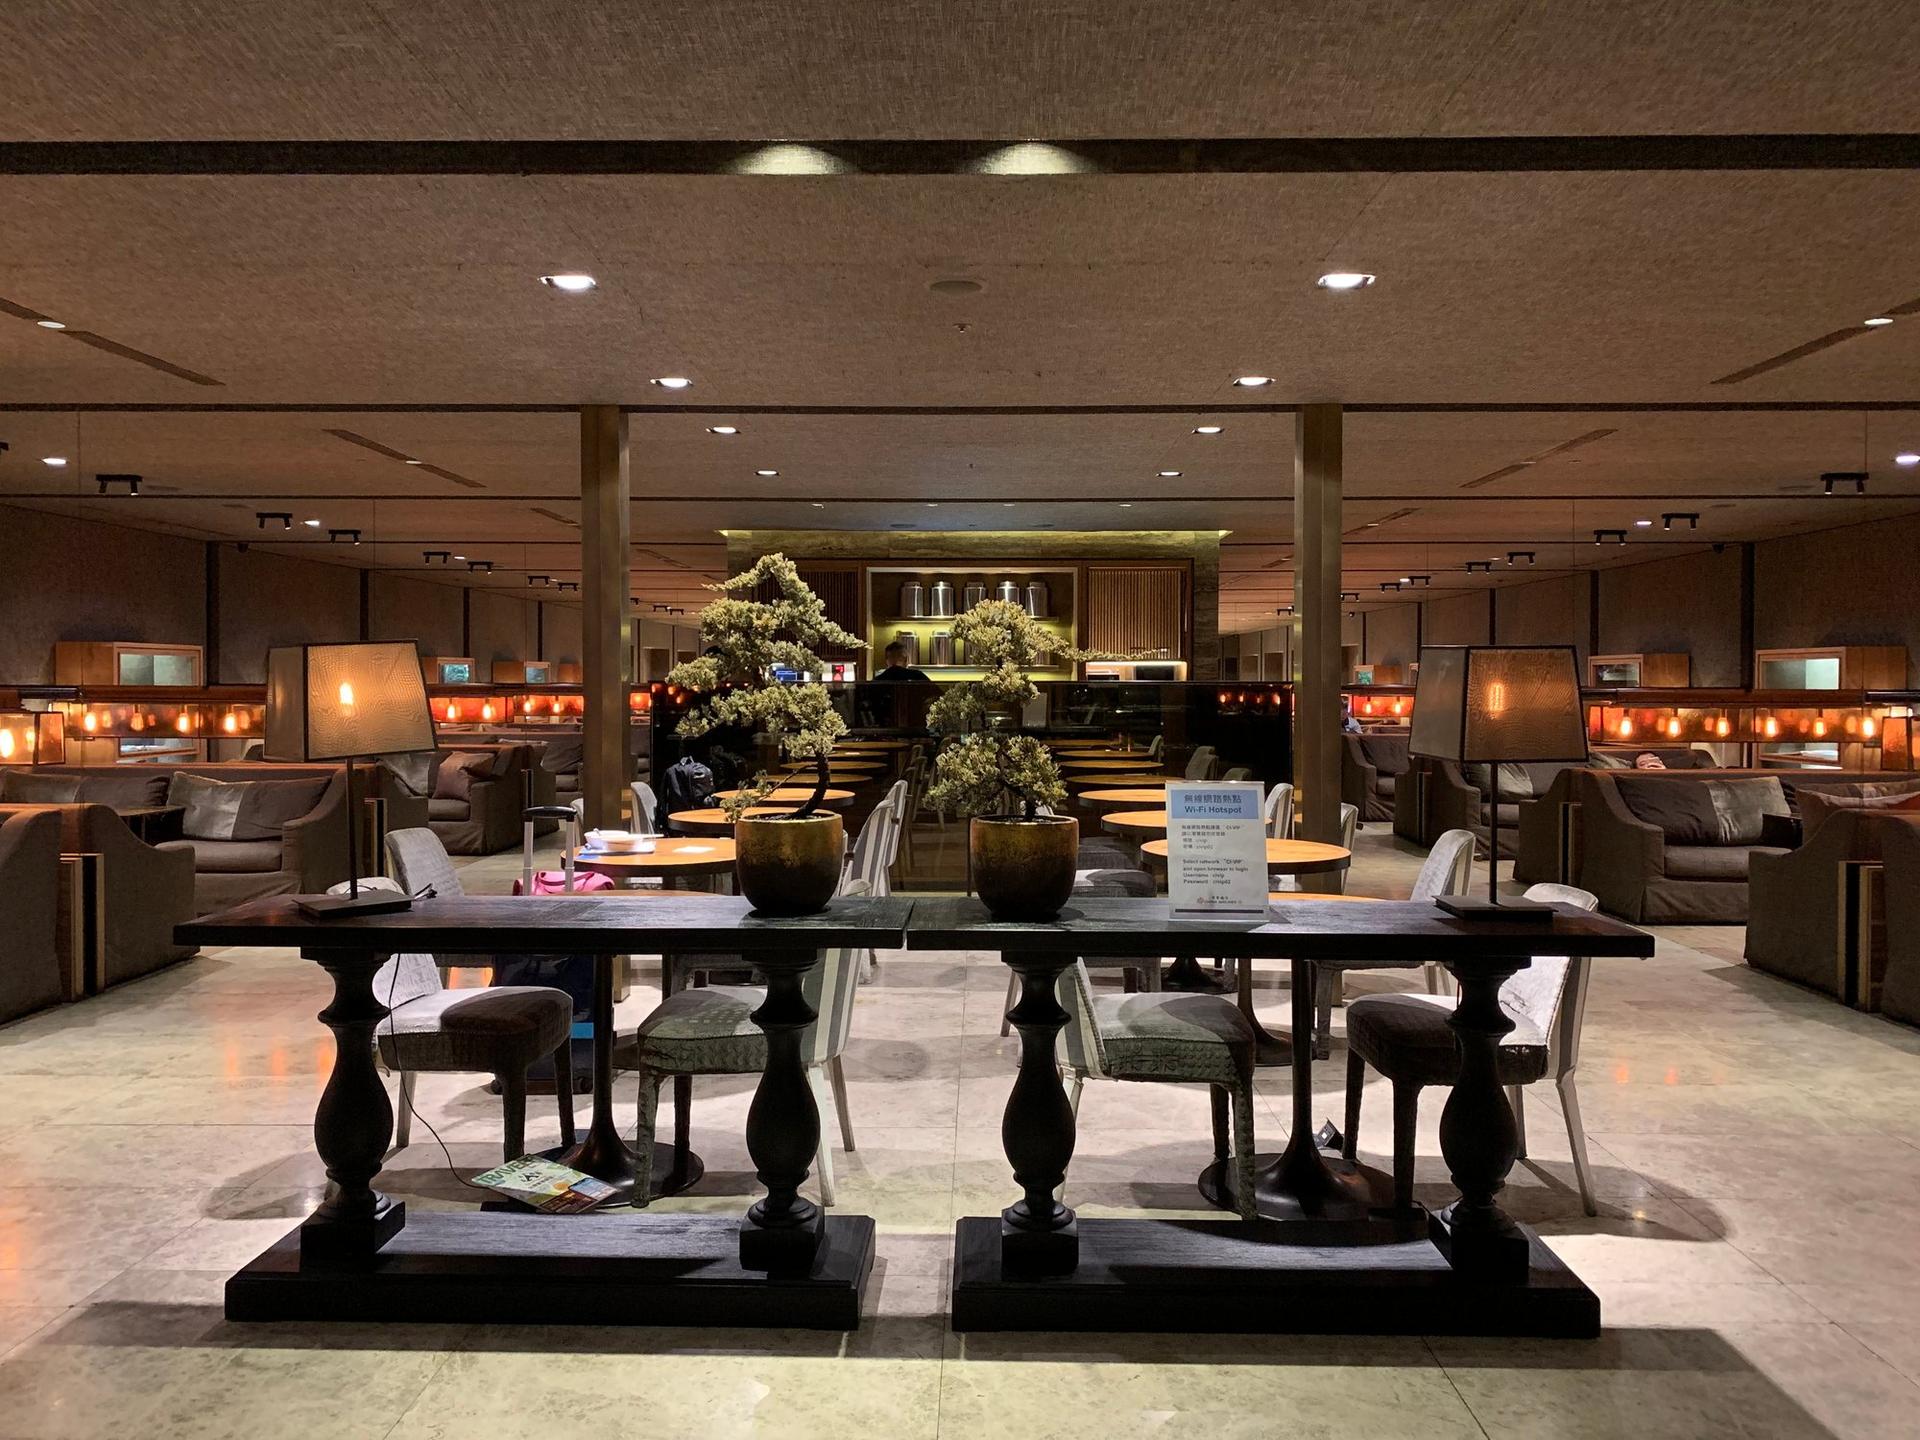 China Airlines Lounge (V1) image 42 of 44